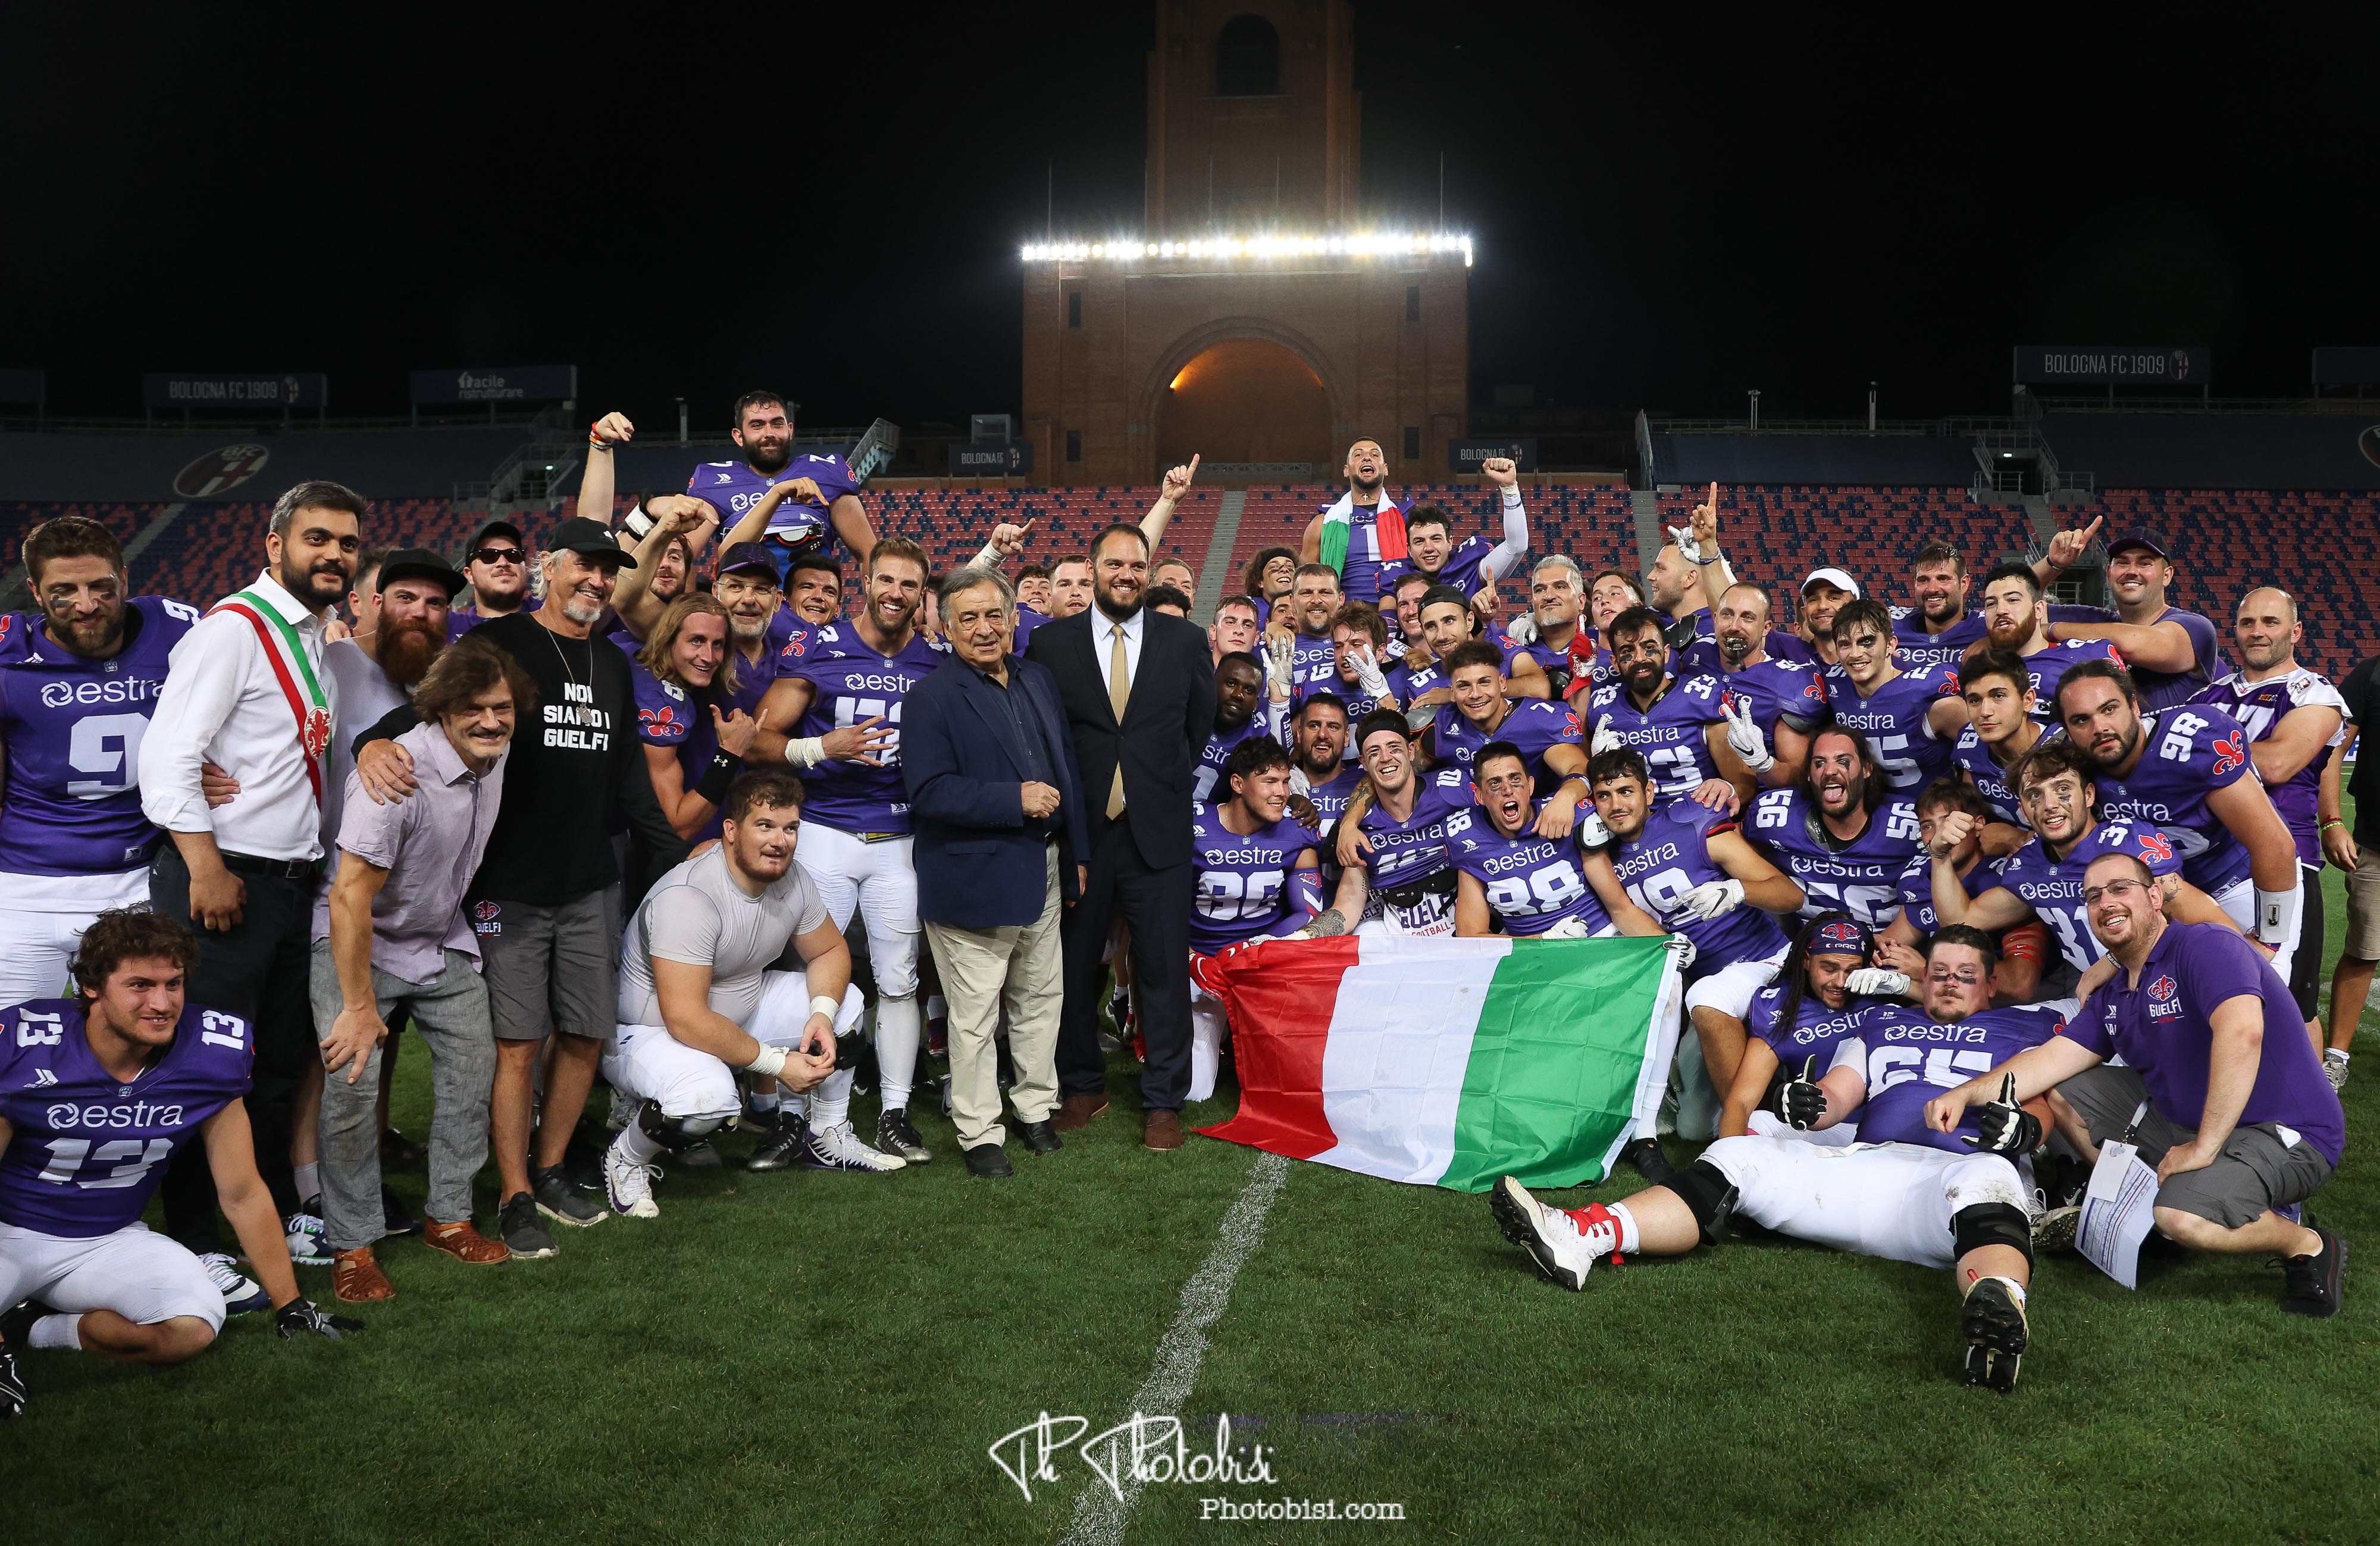 Guelfi Firenze players celebrate their title as 2022 Italian Bowl champions. Photo credit/ @Sergio Bisi.